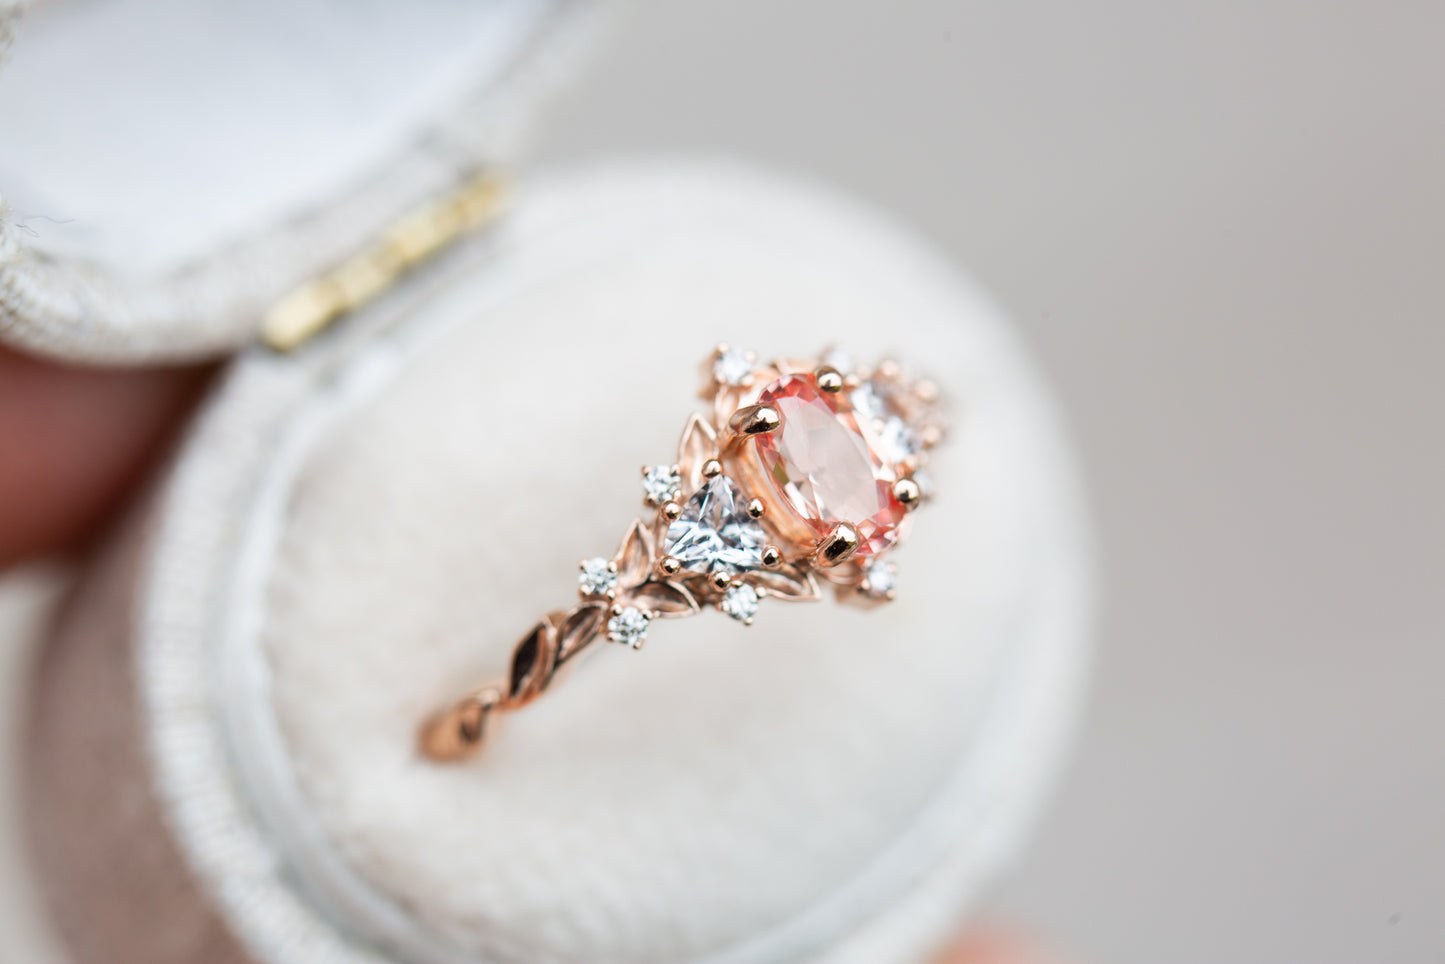 Briar rose three stone with oval lab peach sapphire (fairy queen ring)